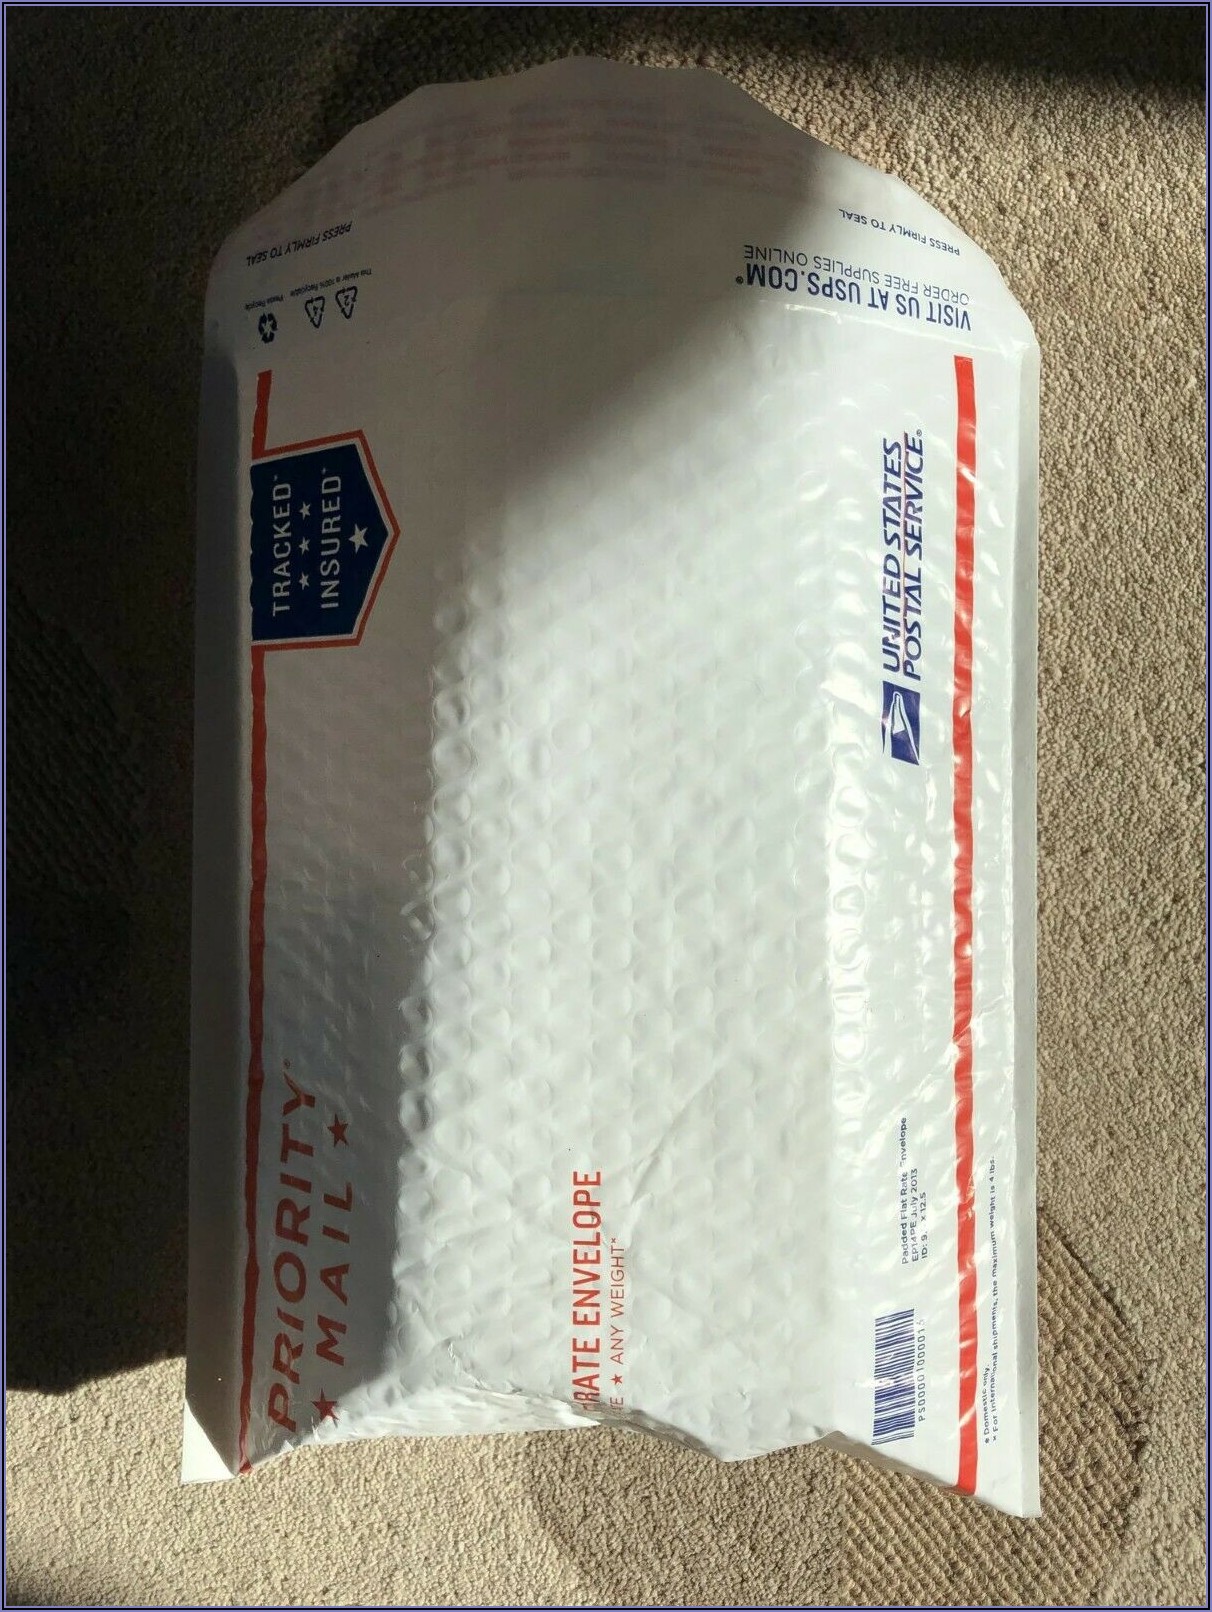 usps padded flat rate envelope cost